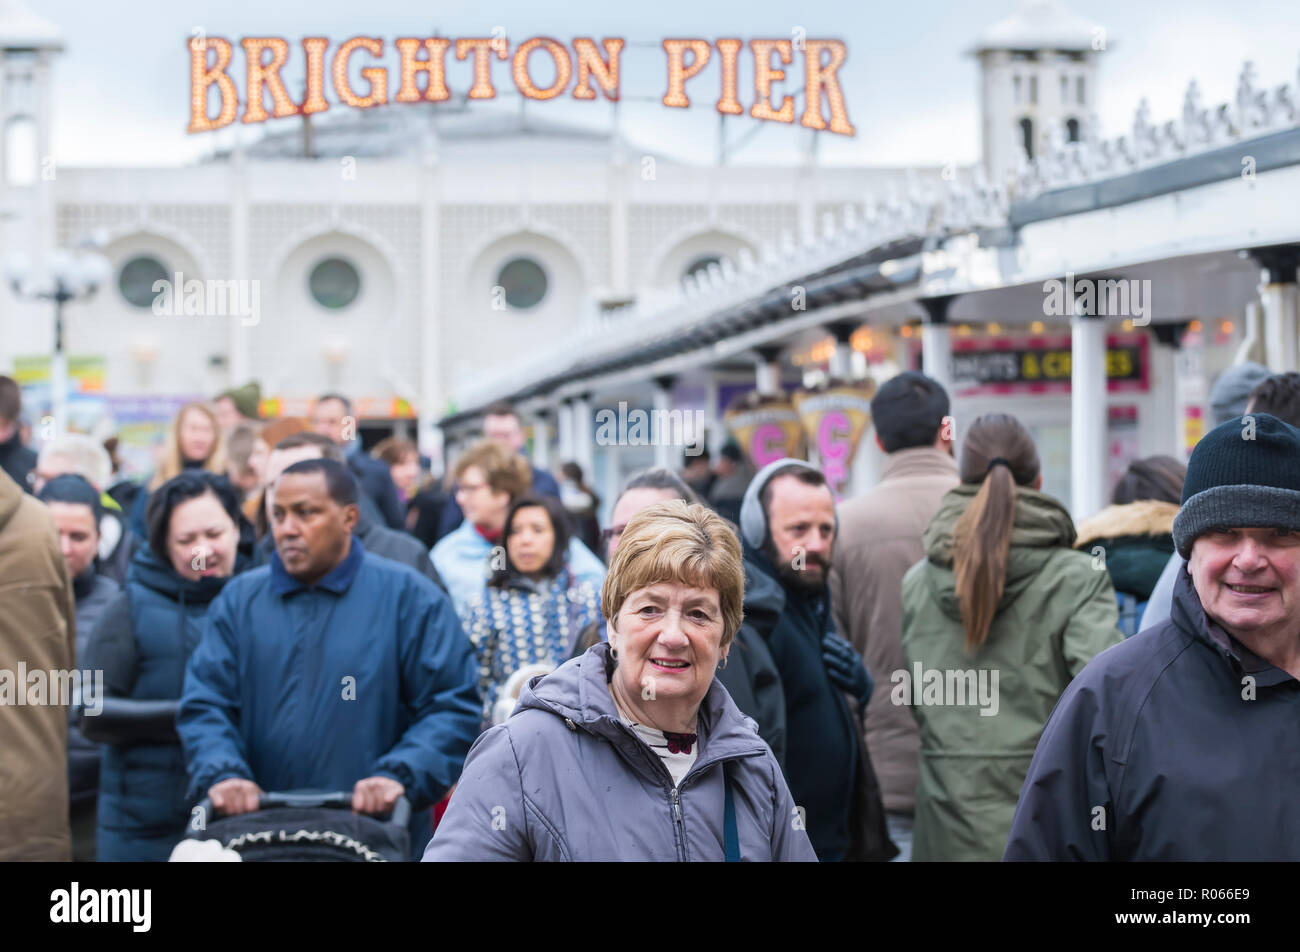 Crowds of people wearing coats on a cold day in Spring on a busy Brighton Pier, East Sussex, England, UK. Stock Photo